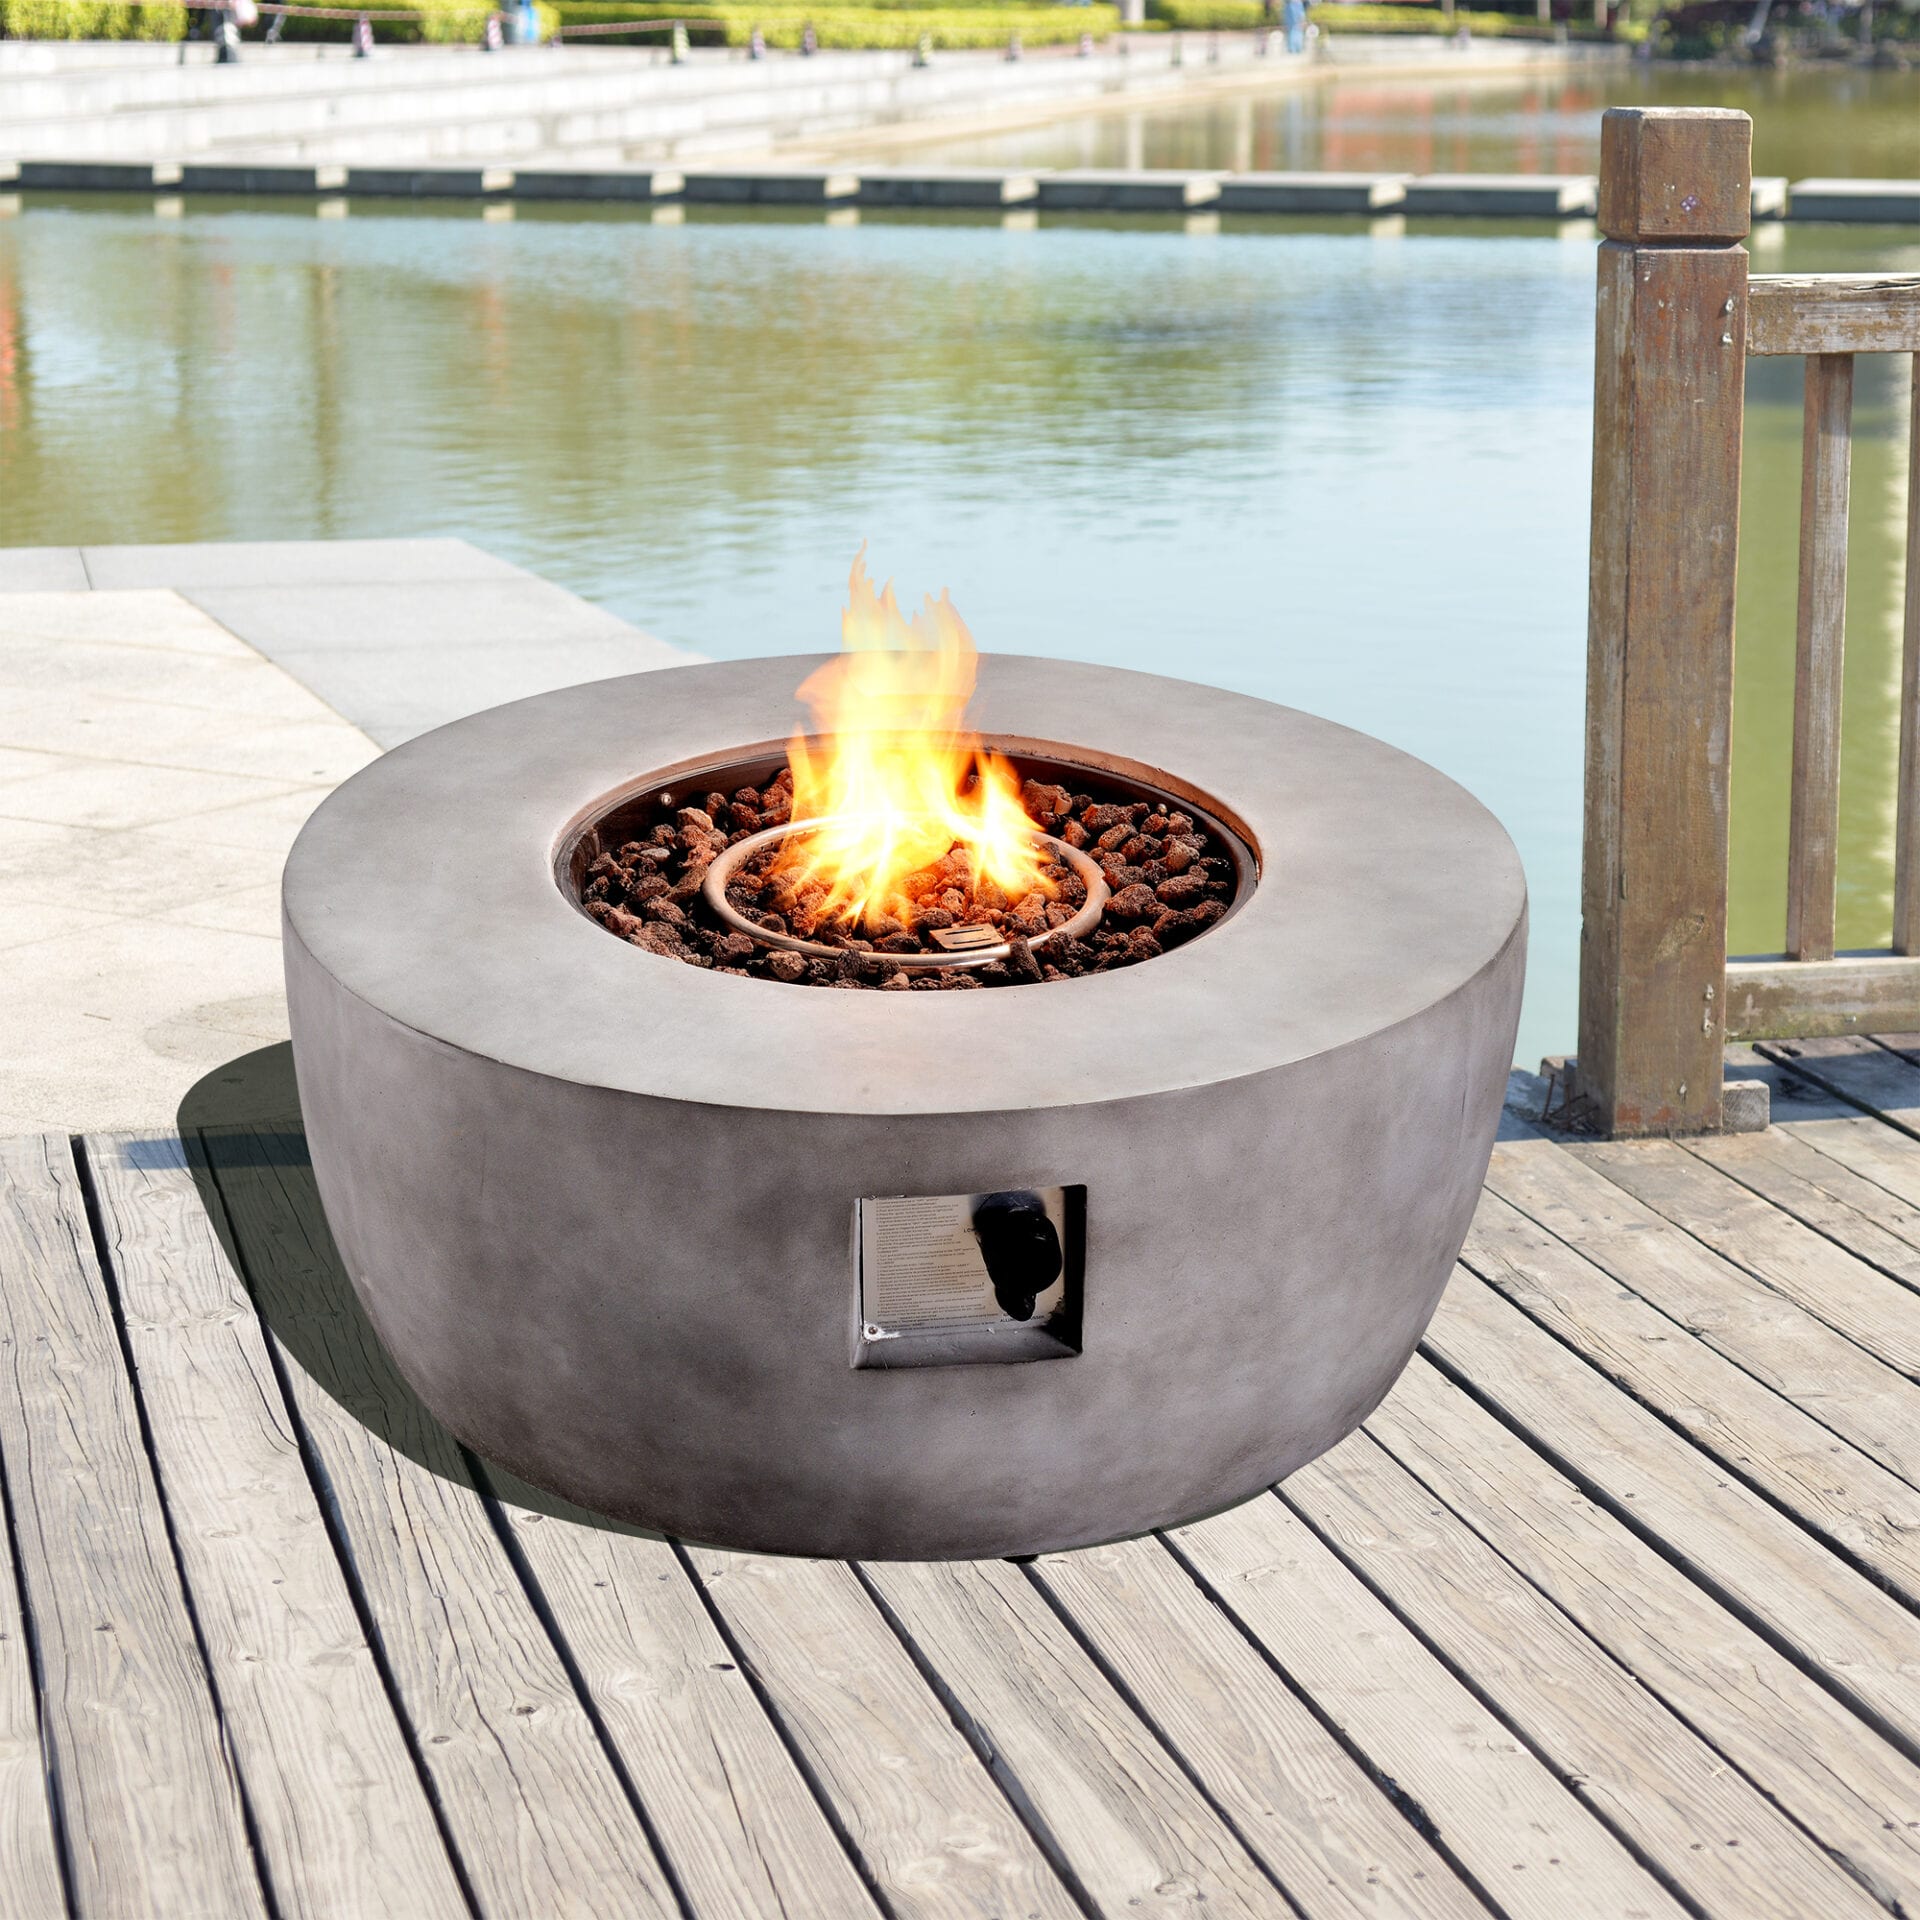 Gas Fire Pit For Outside - LoveMyPatioClub.com